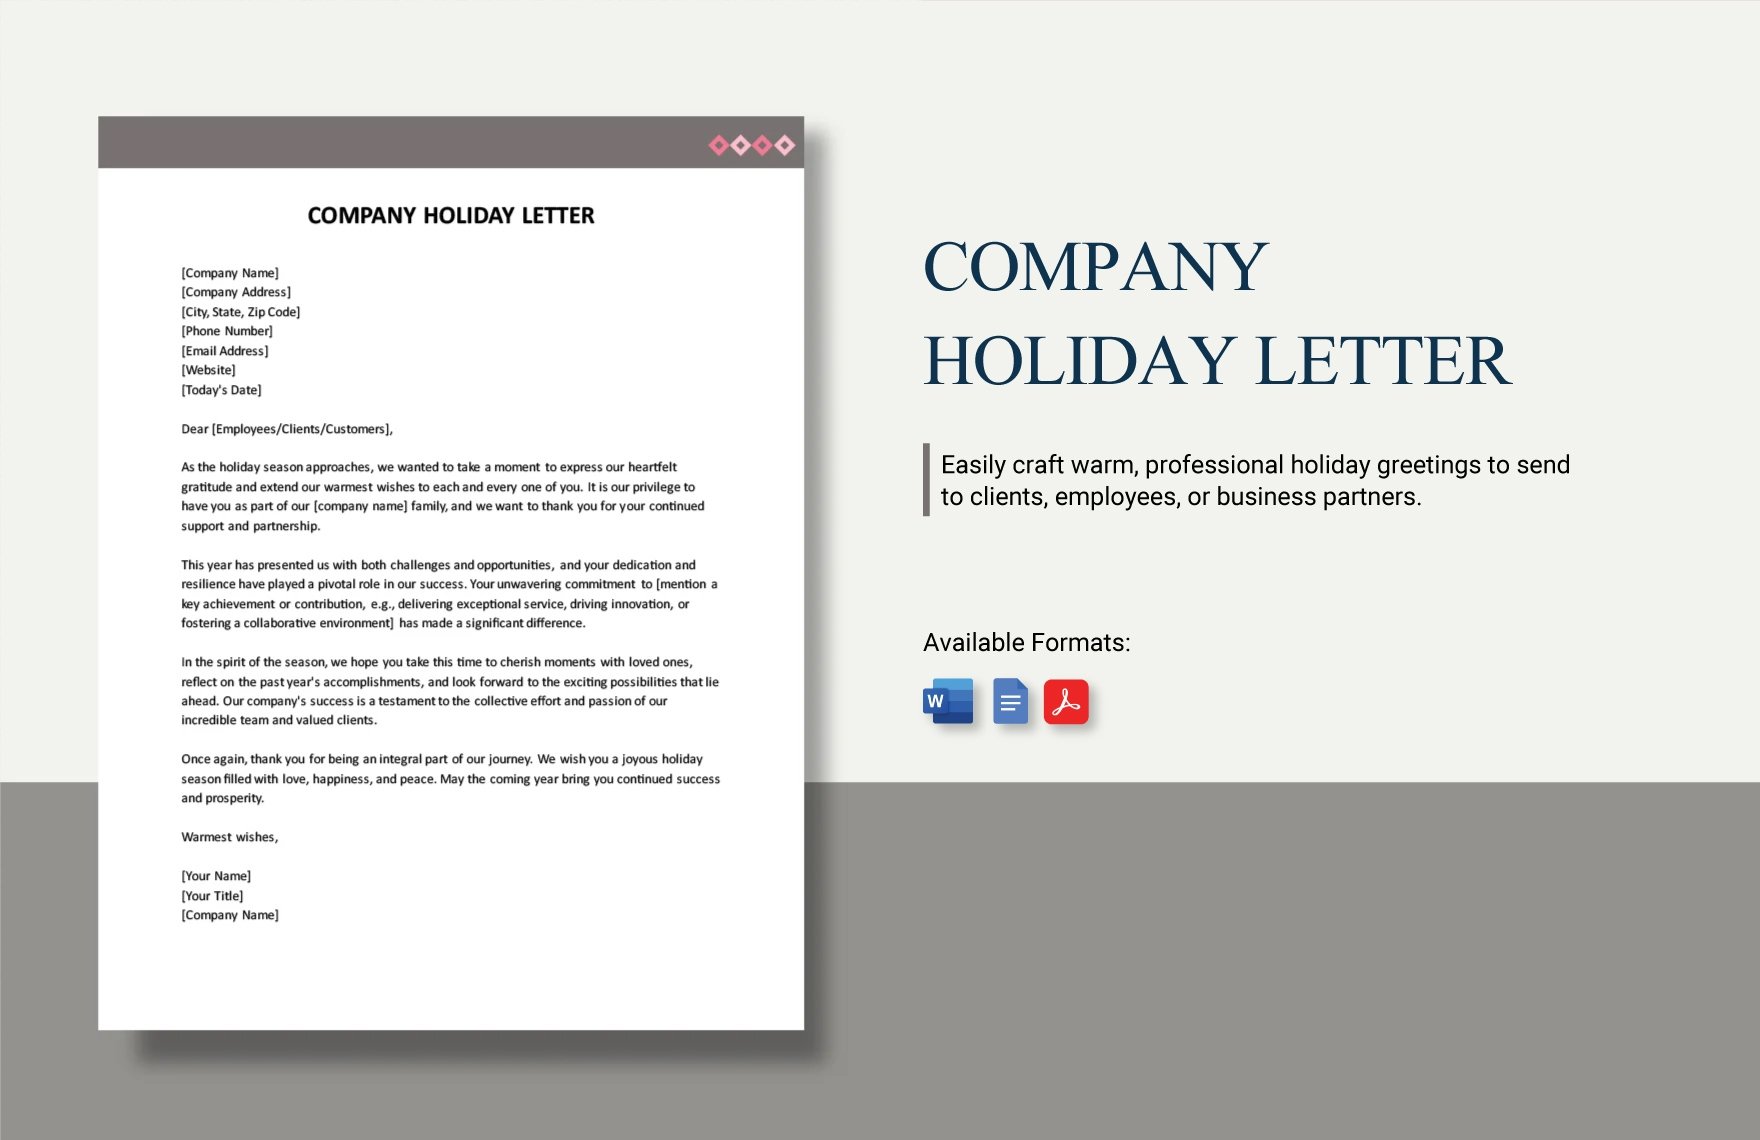 Company Holiday Letter